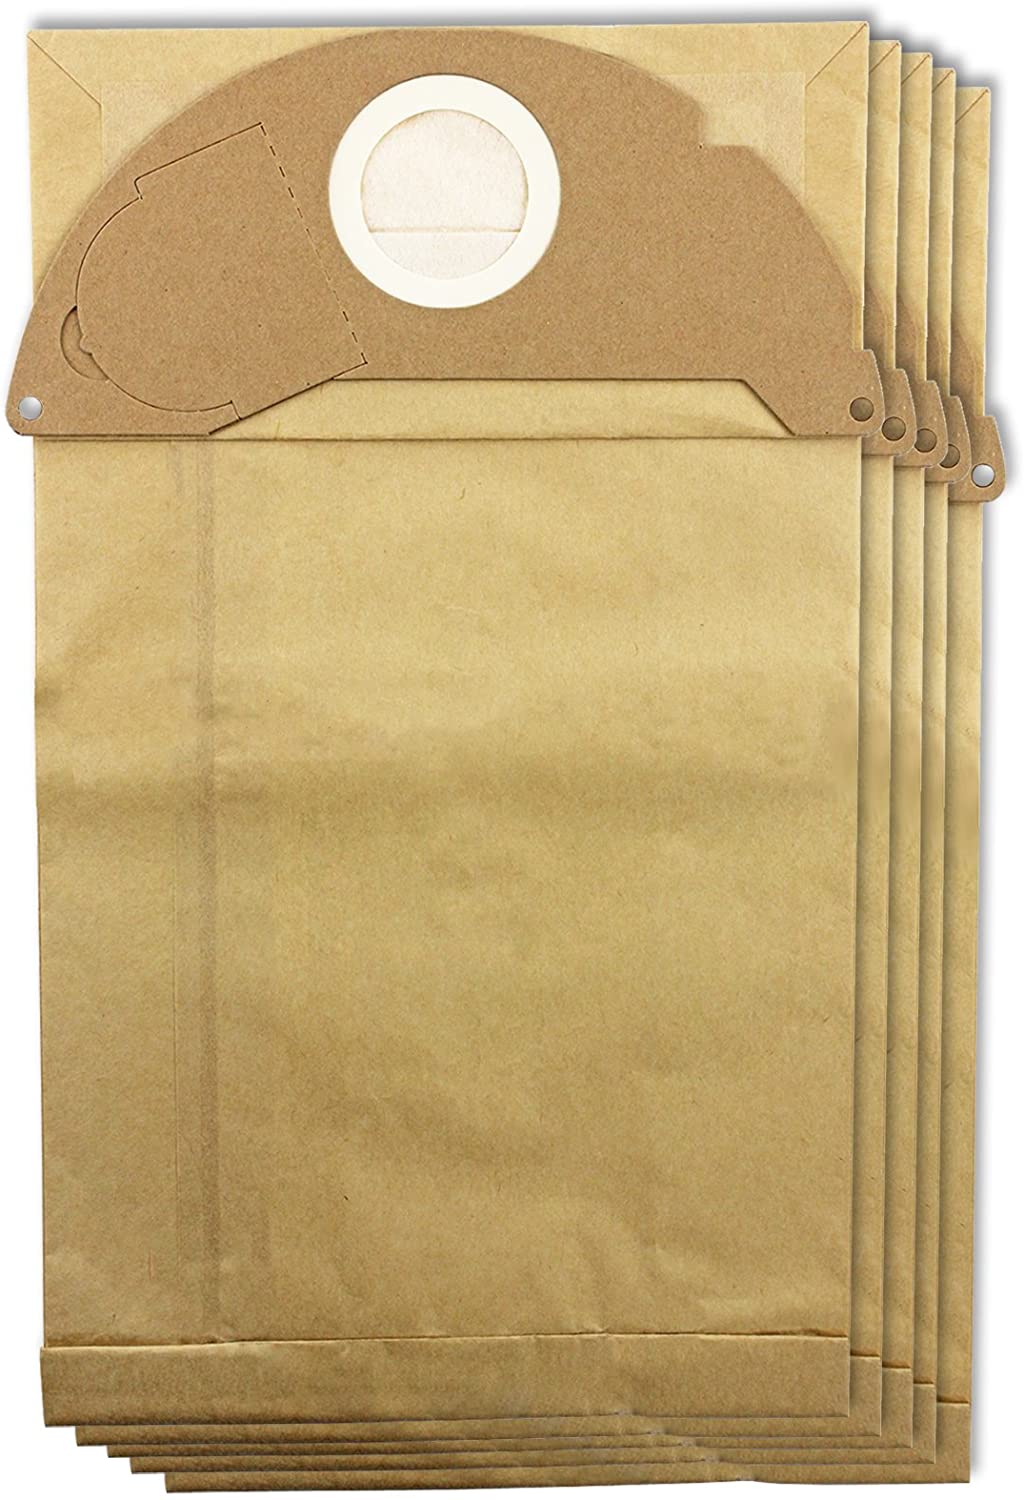 Strong Dust Bags for Karcher A2000 A2004 A2014 Vacuum Cleaners (Pack of 5 + Fresheners)